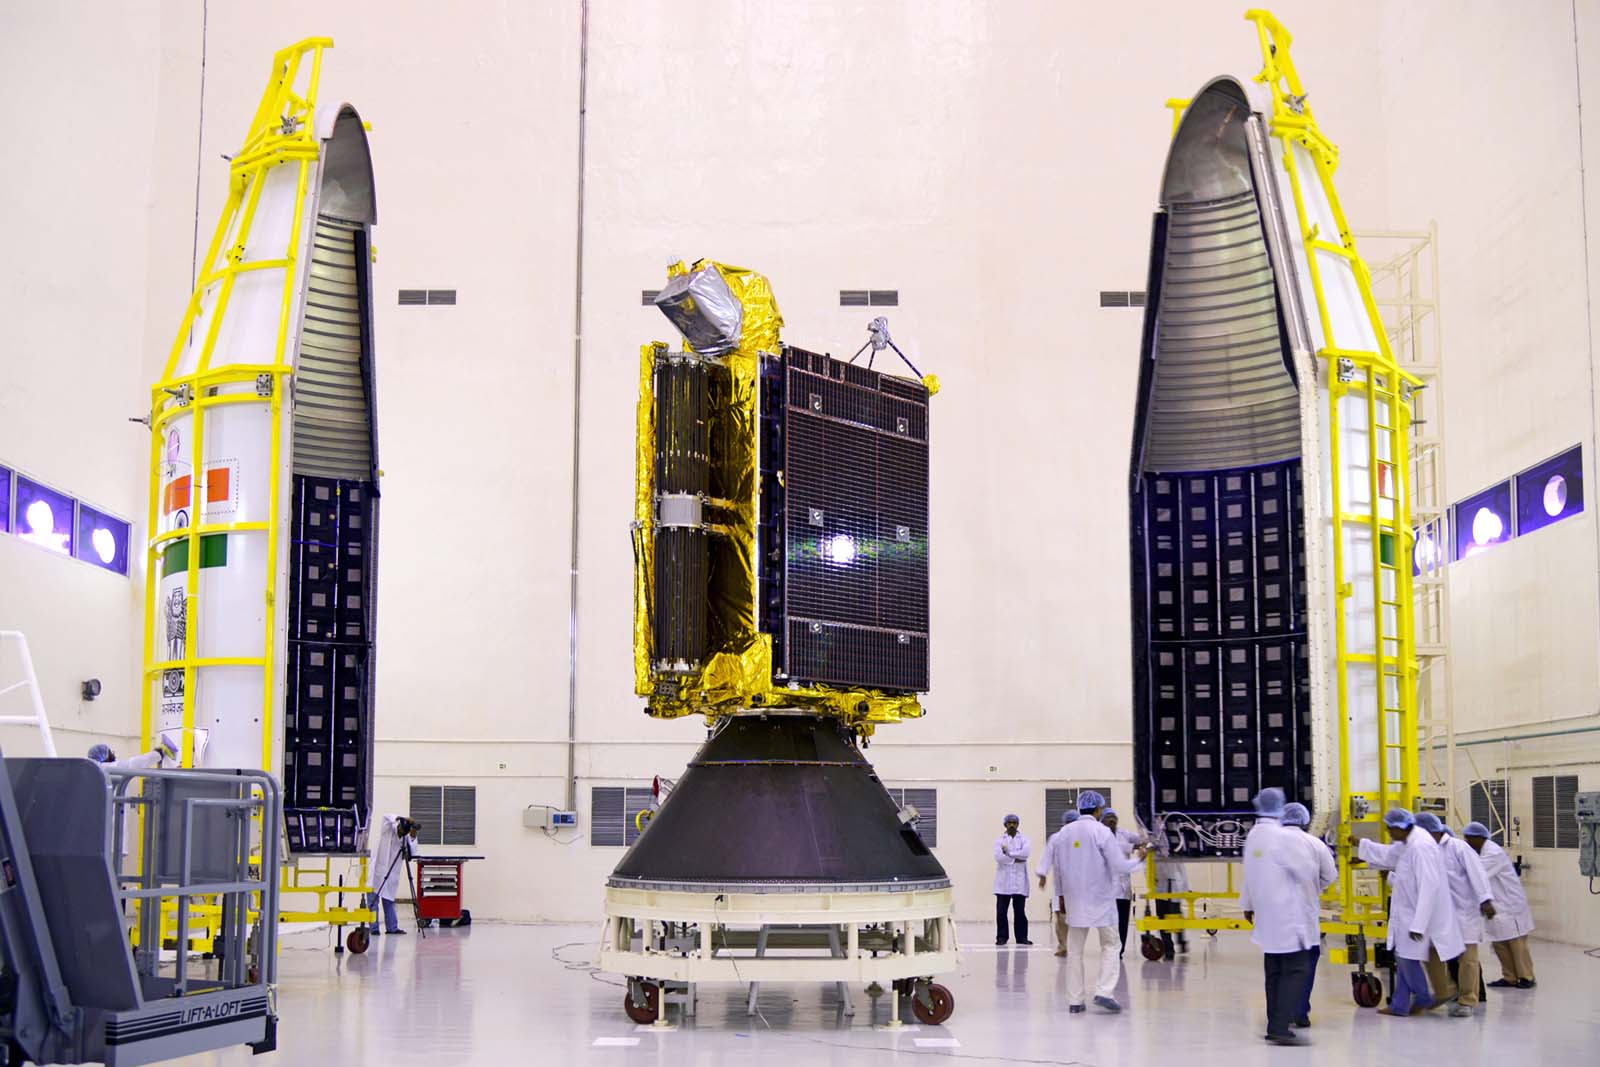 16gsat-6-seen-with-two-halves-of-payload-faring-of-gslv-d6.jpg